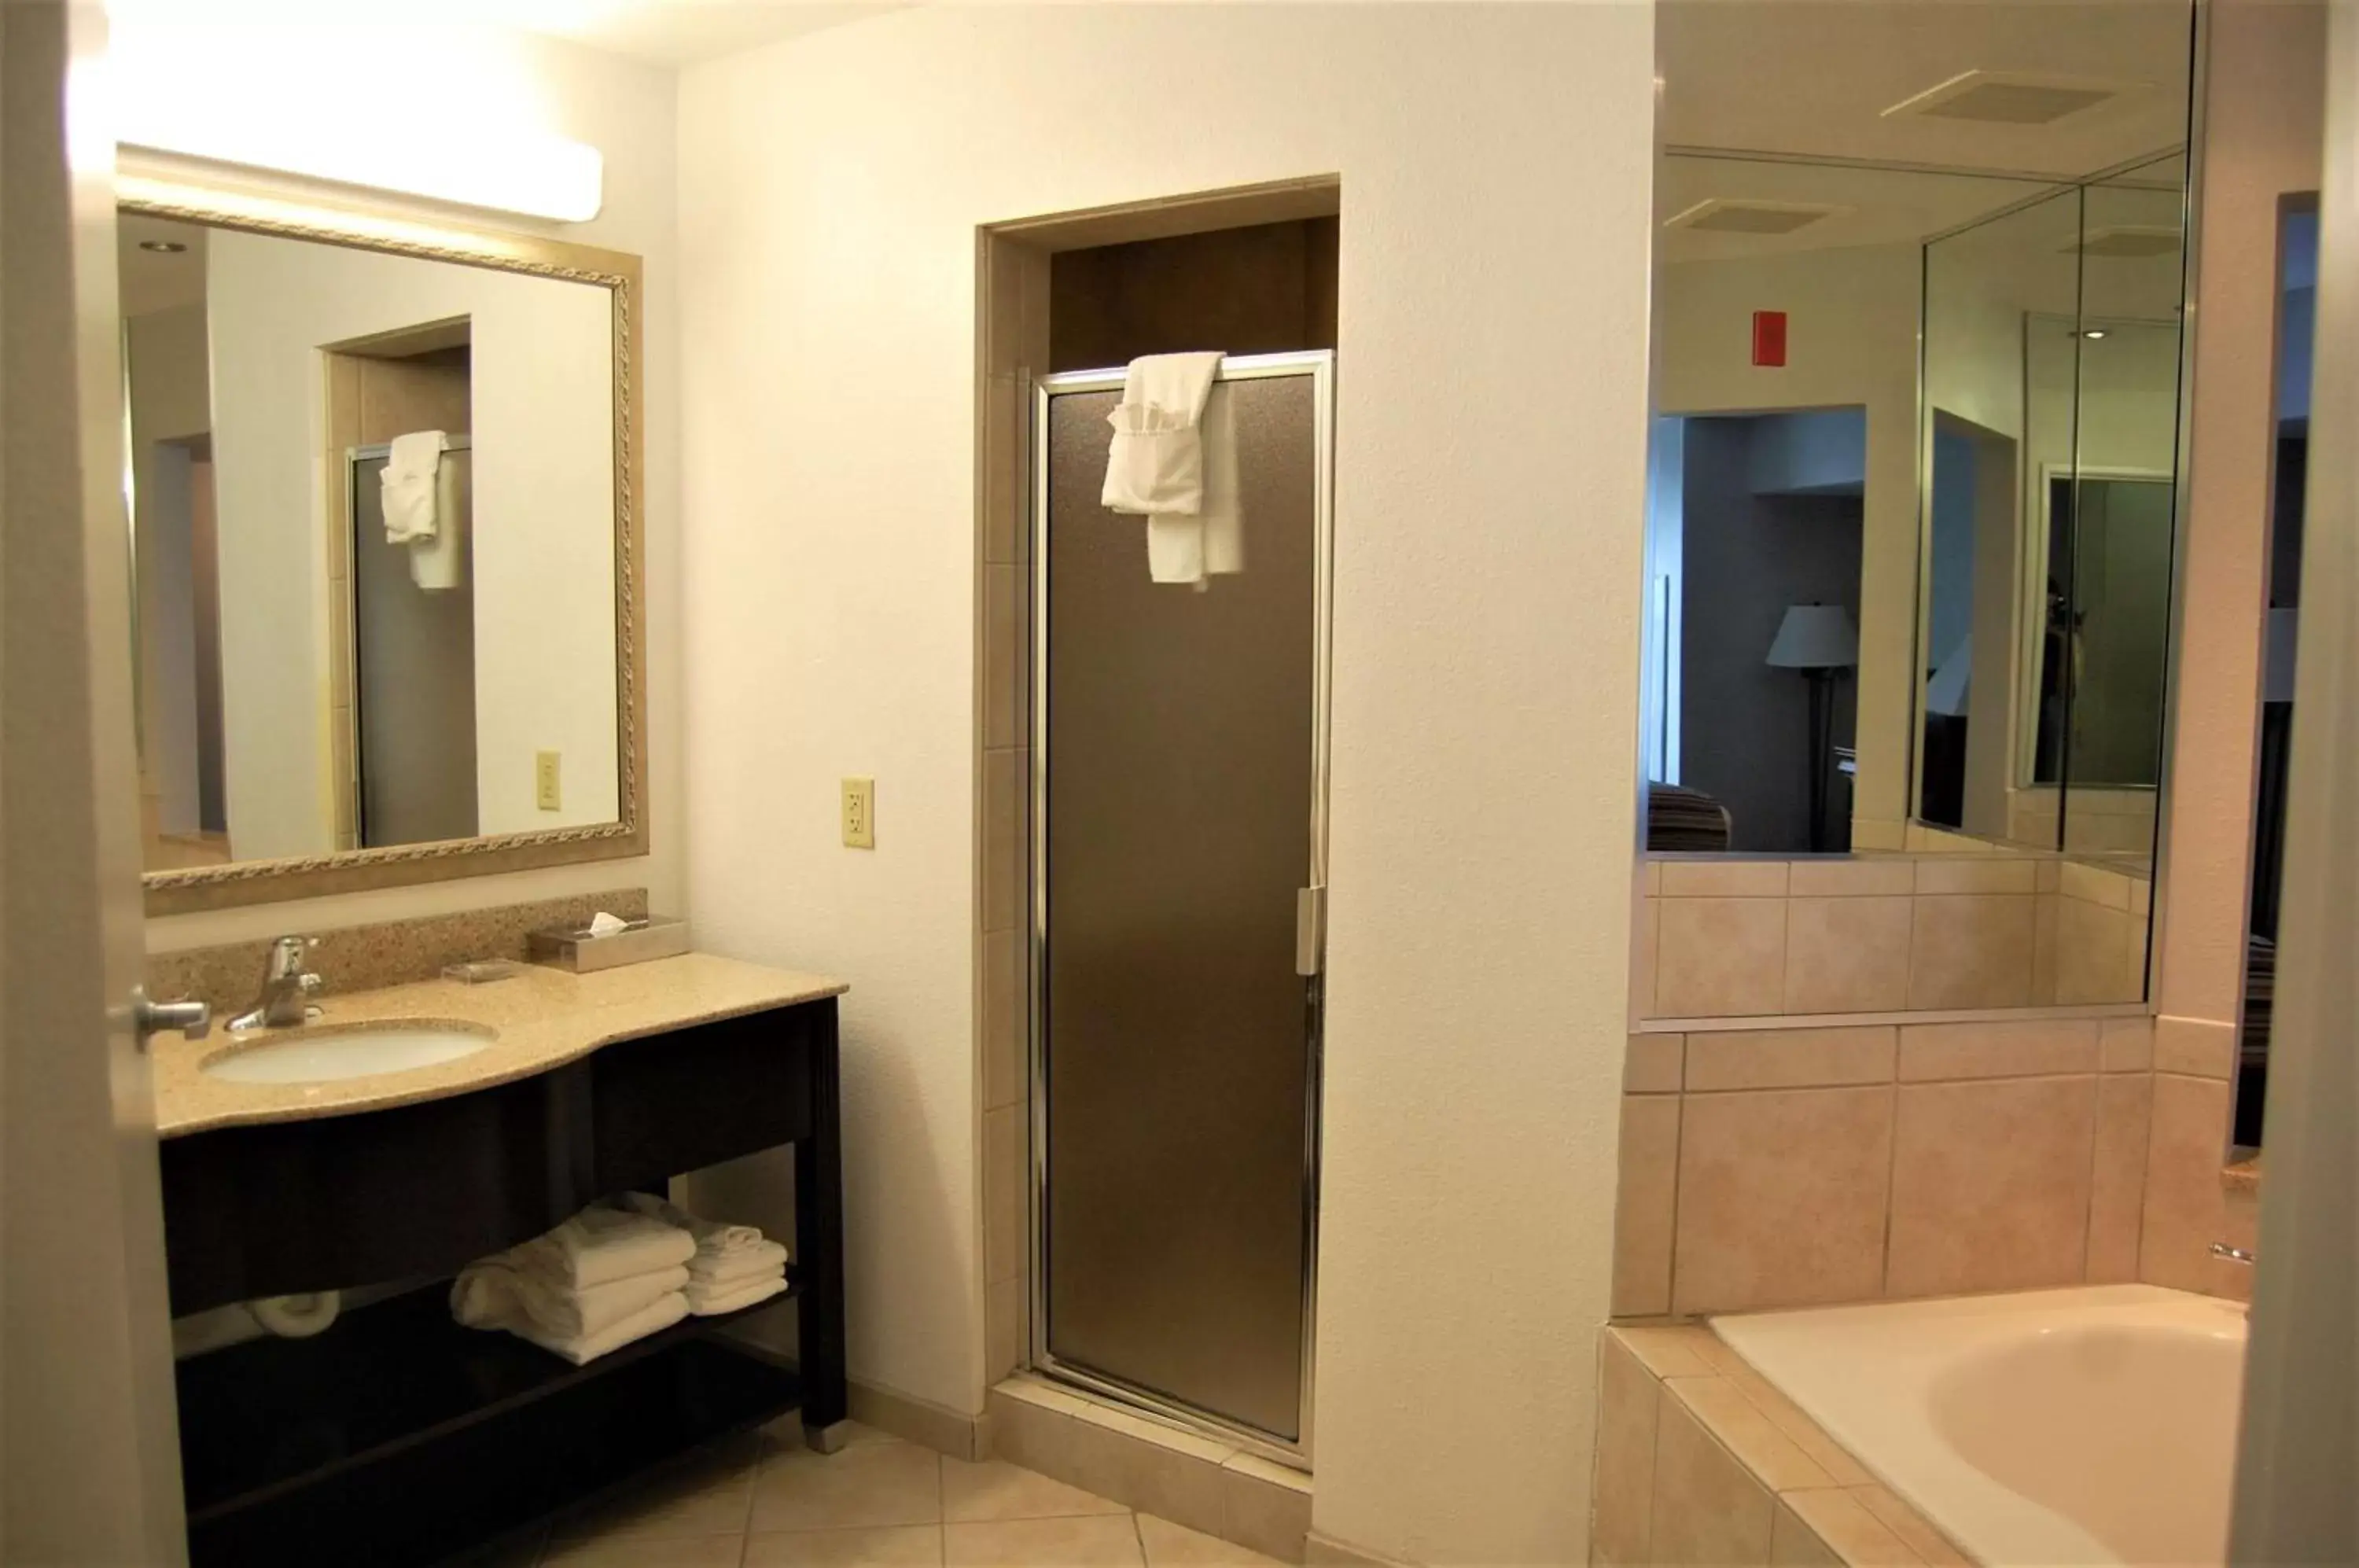 Bathroom in Country Inn & Suites by Radisson, Athens, GA